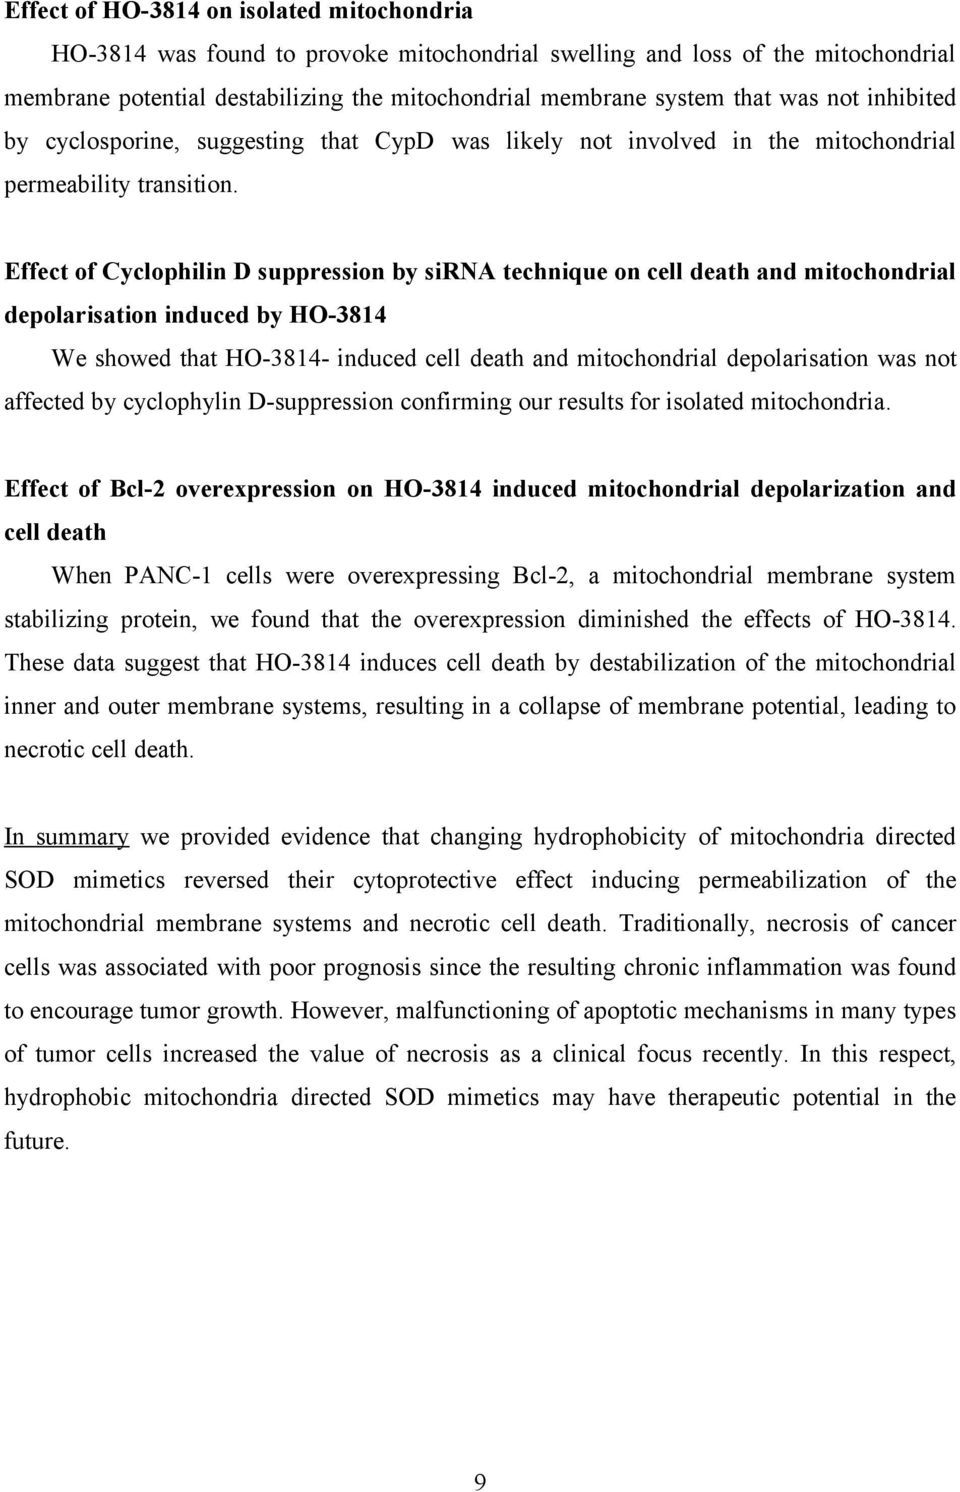 Effect of Cyclophilin D suppression by sirna technique on cell death and mitochondrial depolarisation induced by HO-3814 We showed that HO-3814- induced cell death and mitochondrial depolarisation